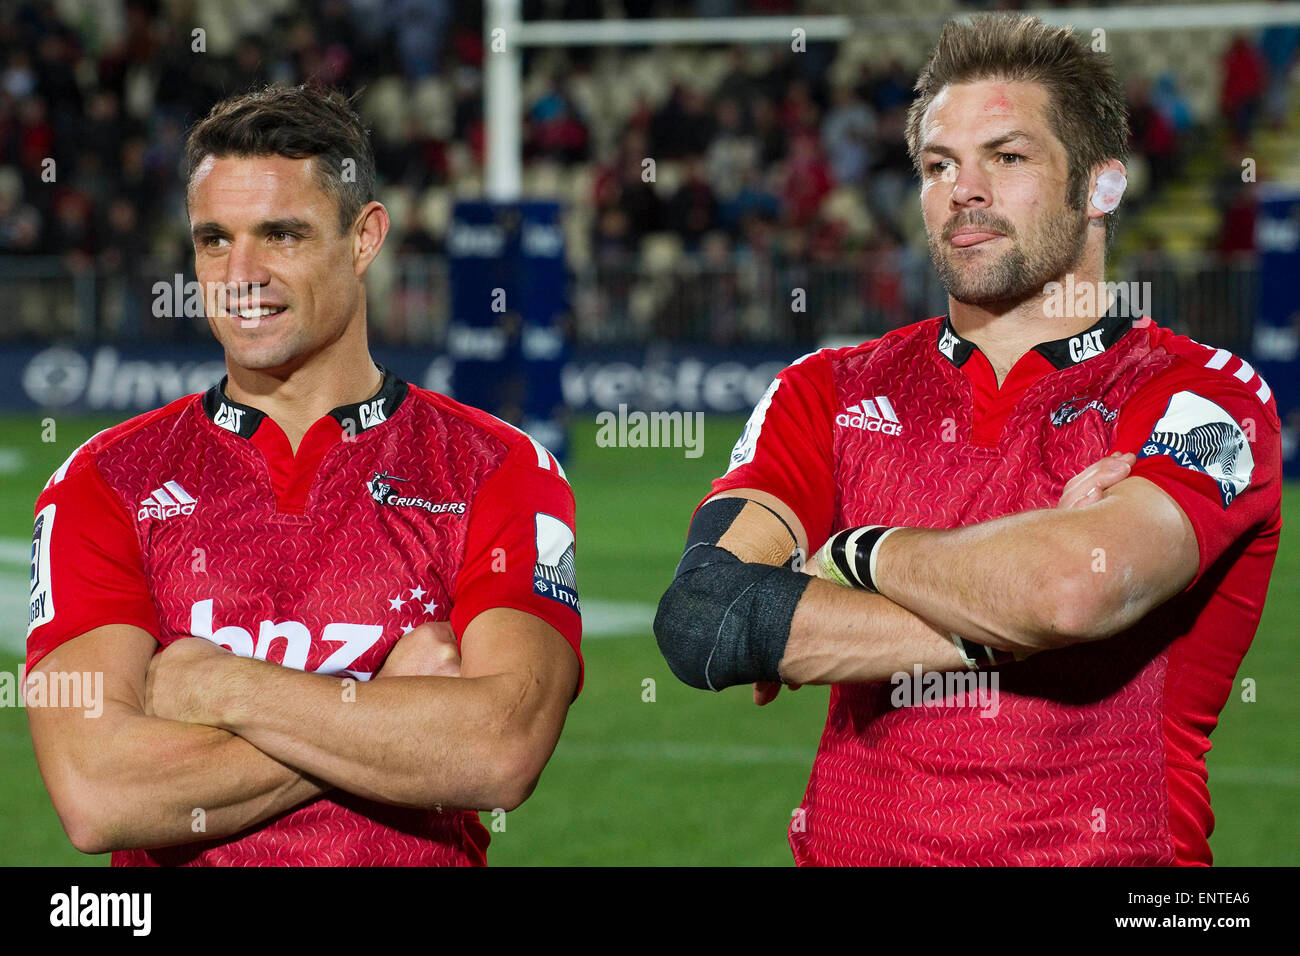 Christchurch, New Zealand. 8th May, 2015. Christchurch, New Zealand - May 8, 2015 - Dan Carter and Richie McCaw both of the Crusaders (L-R) after the Investec Super Rugby match between the Crusaders and Reds at AMI Stadium on May 8, 2015 in Christchurch, New Zealand. © dpa/Alamy Live News Stock Photo